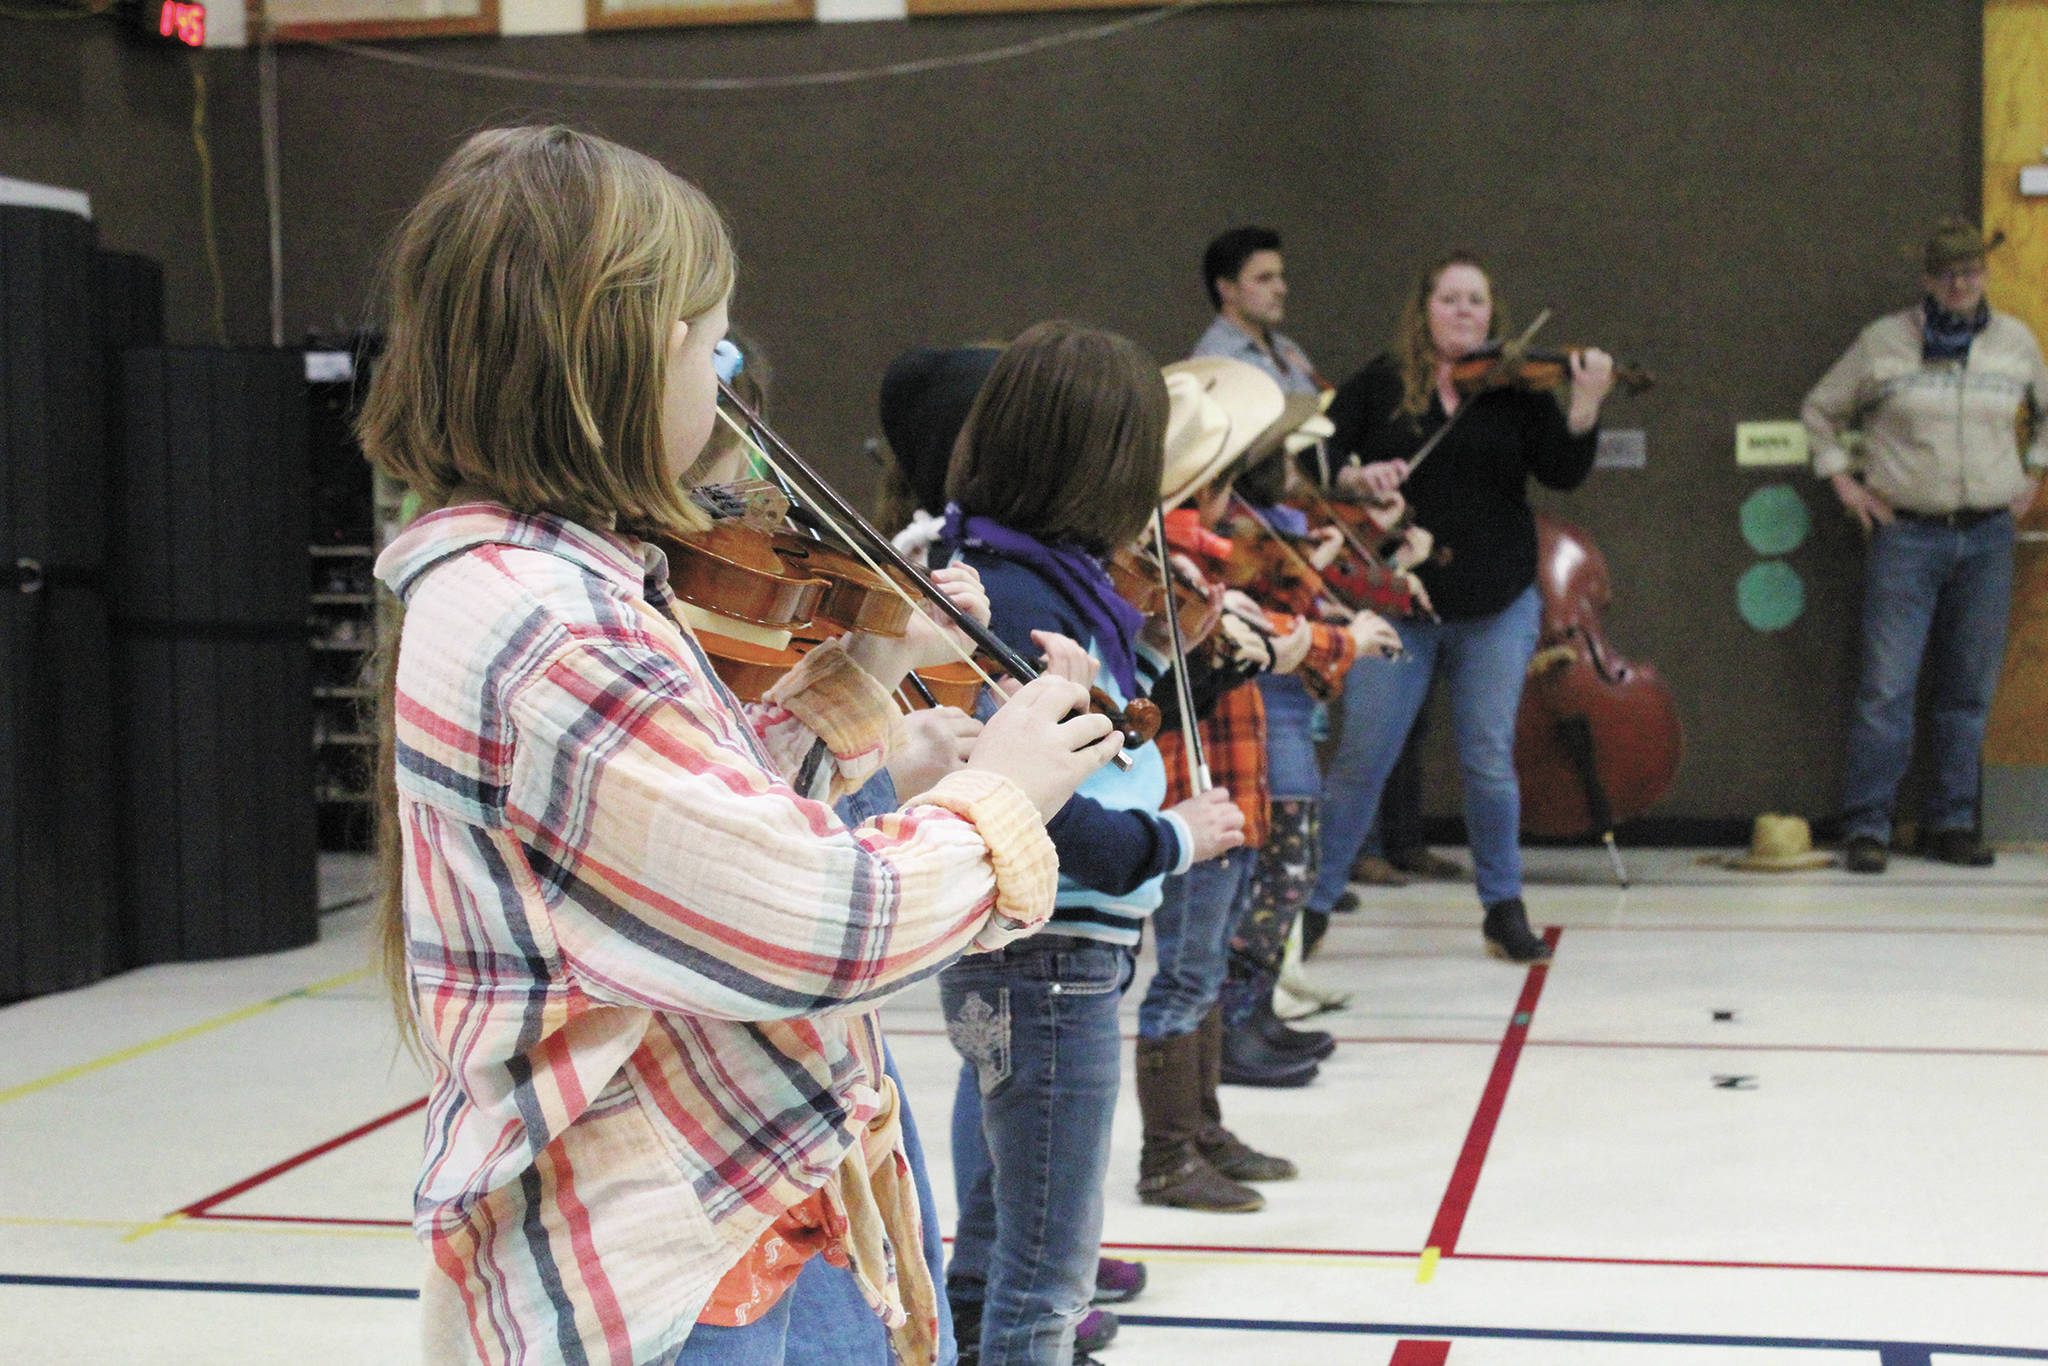 Members of the Paul Banks Preludes, under the direction of Katy Klann perform at a Thursday, March 5, 2020 assembly to celebrate the end of the school’s annual read-a-thon at Paul Banks Elementary School in Homer, Alaska. (Photo by Megan Pacer/Homer News)